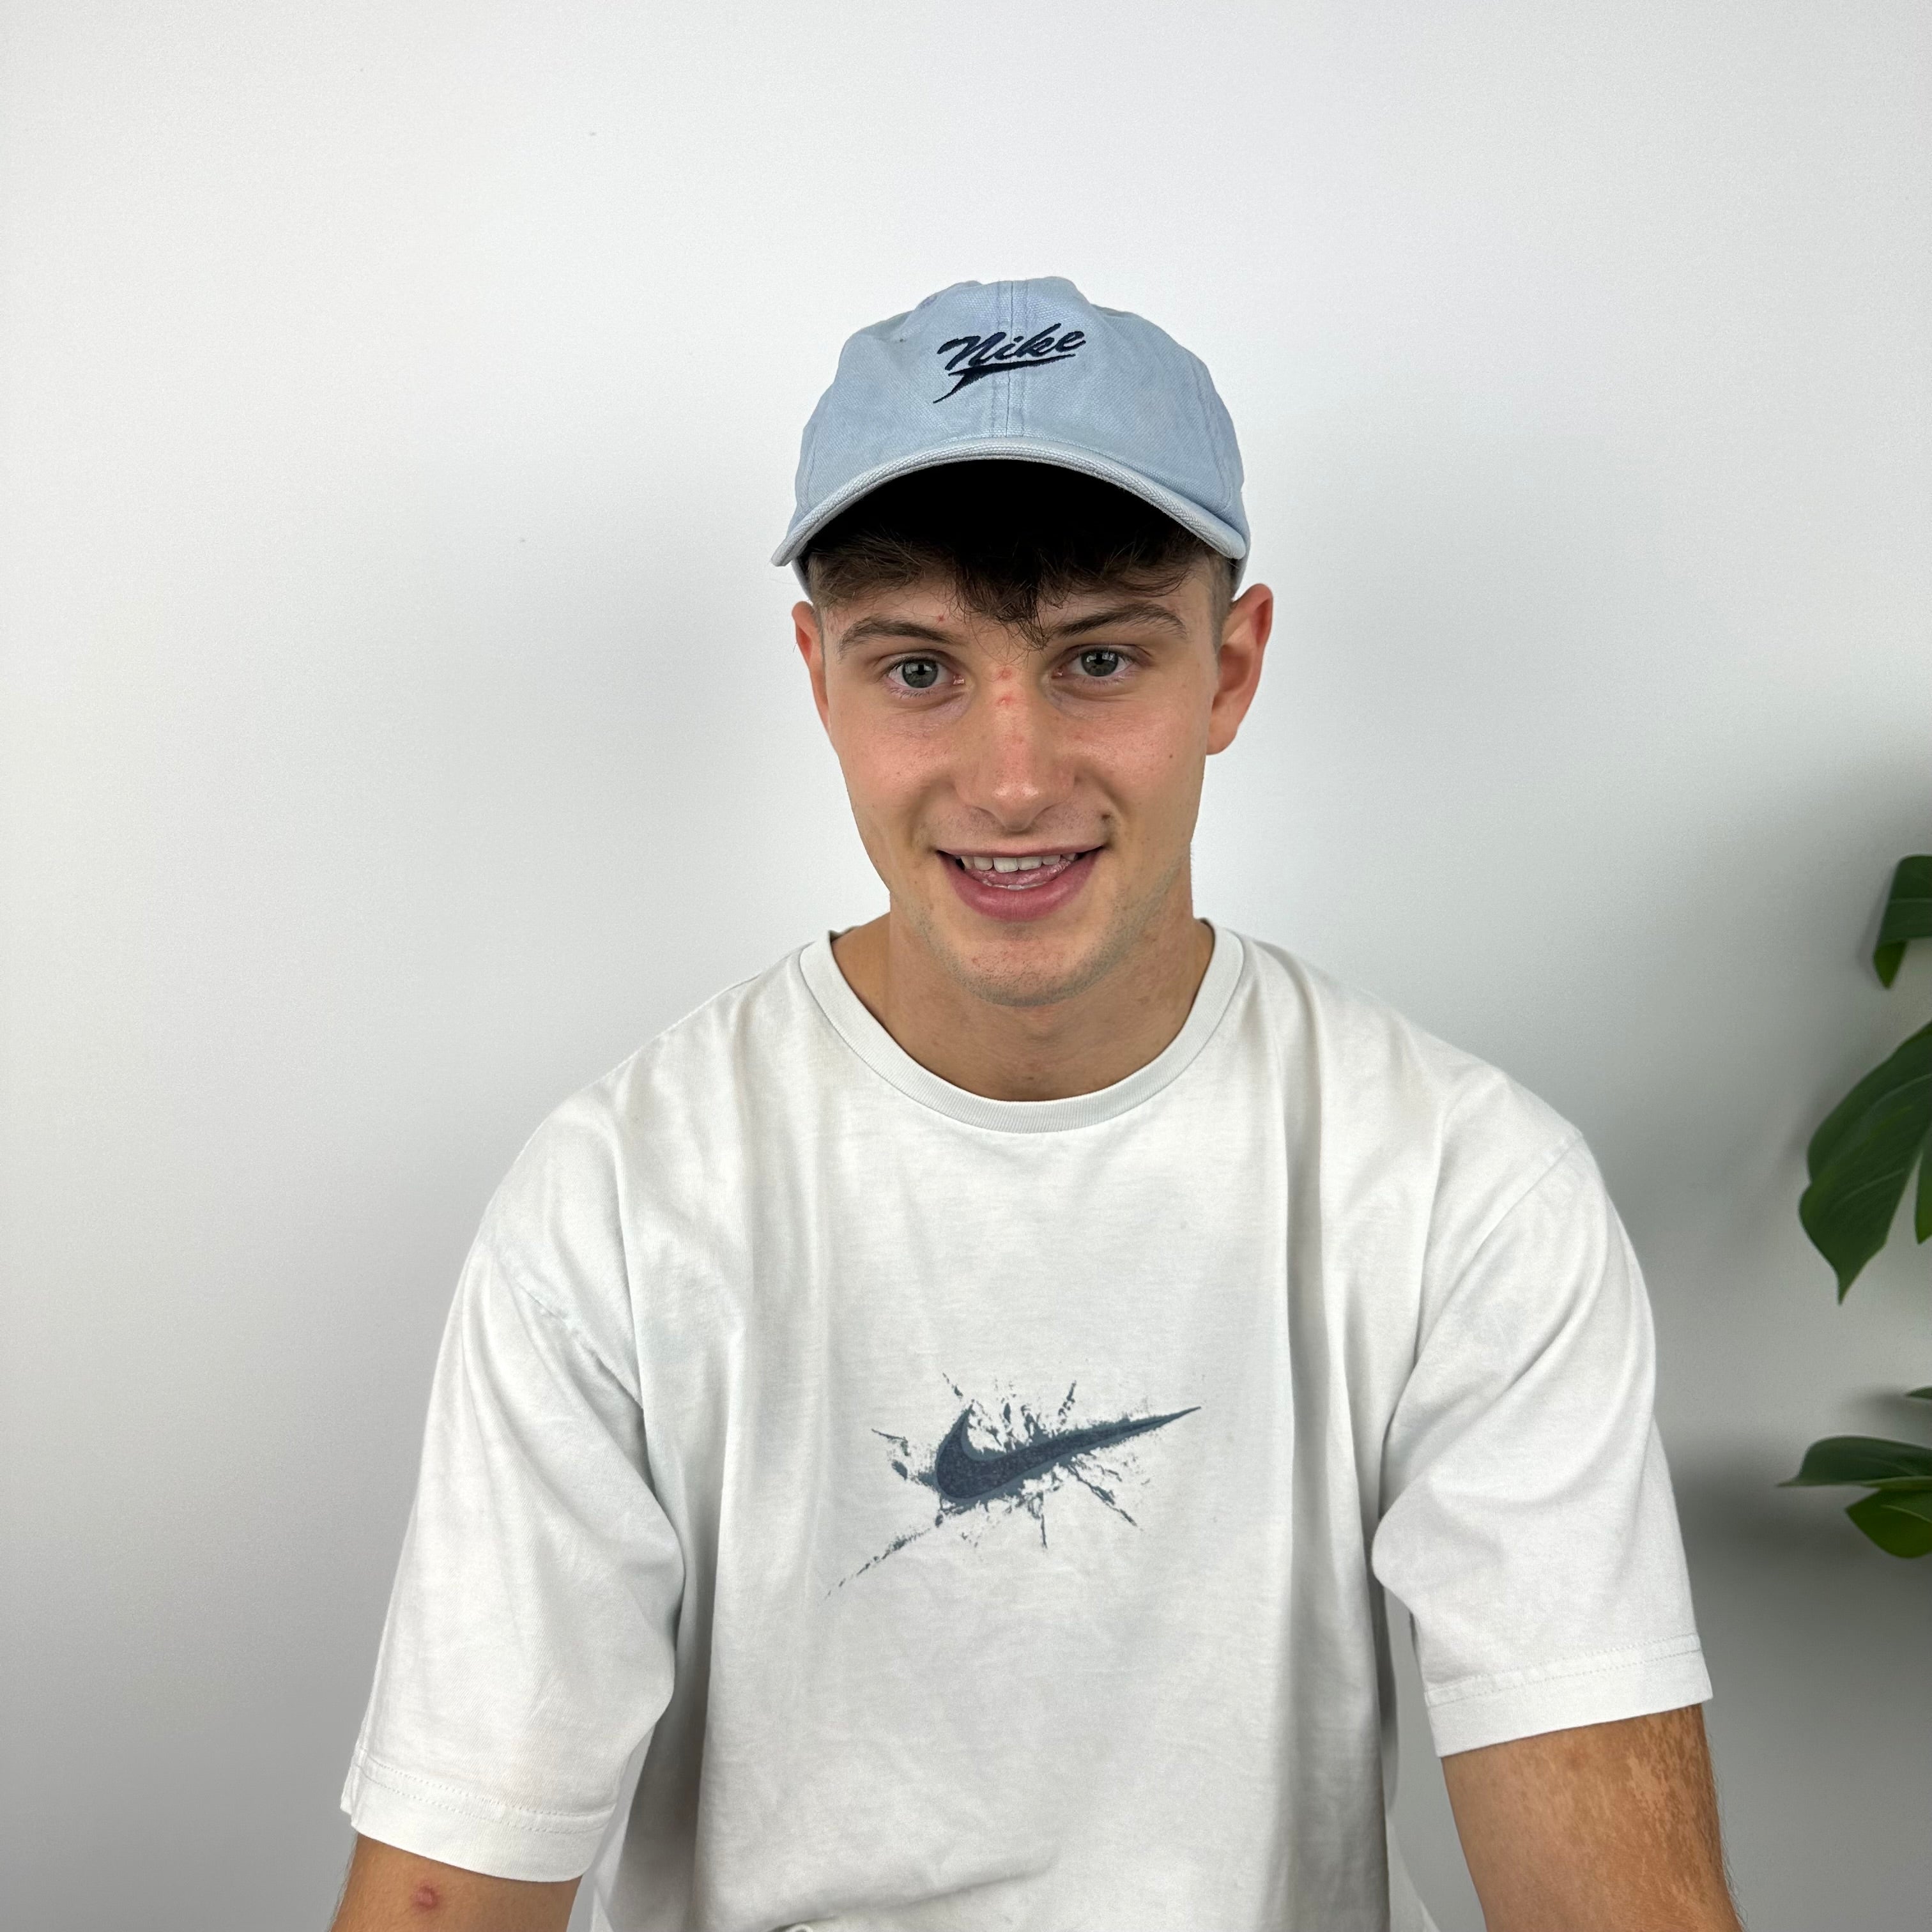 Nike RARE Baby Blue Embroidered Spell Out Cap